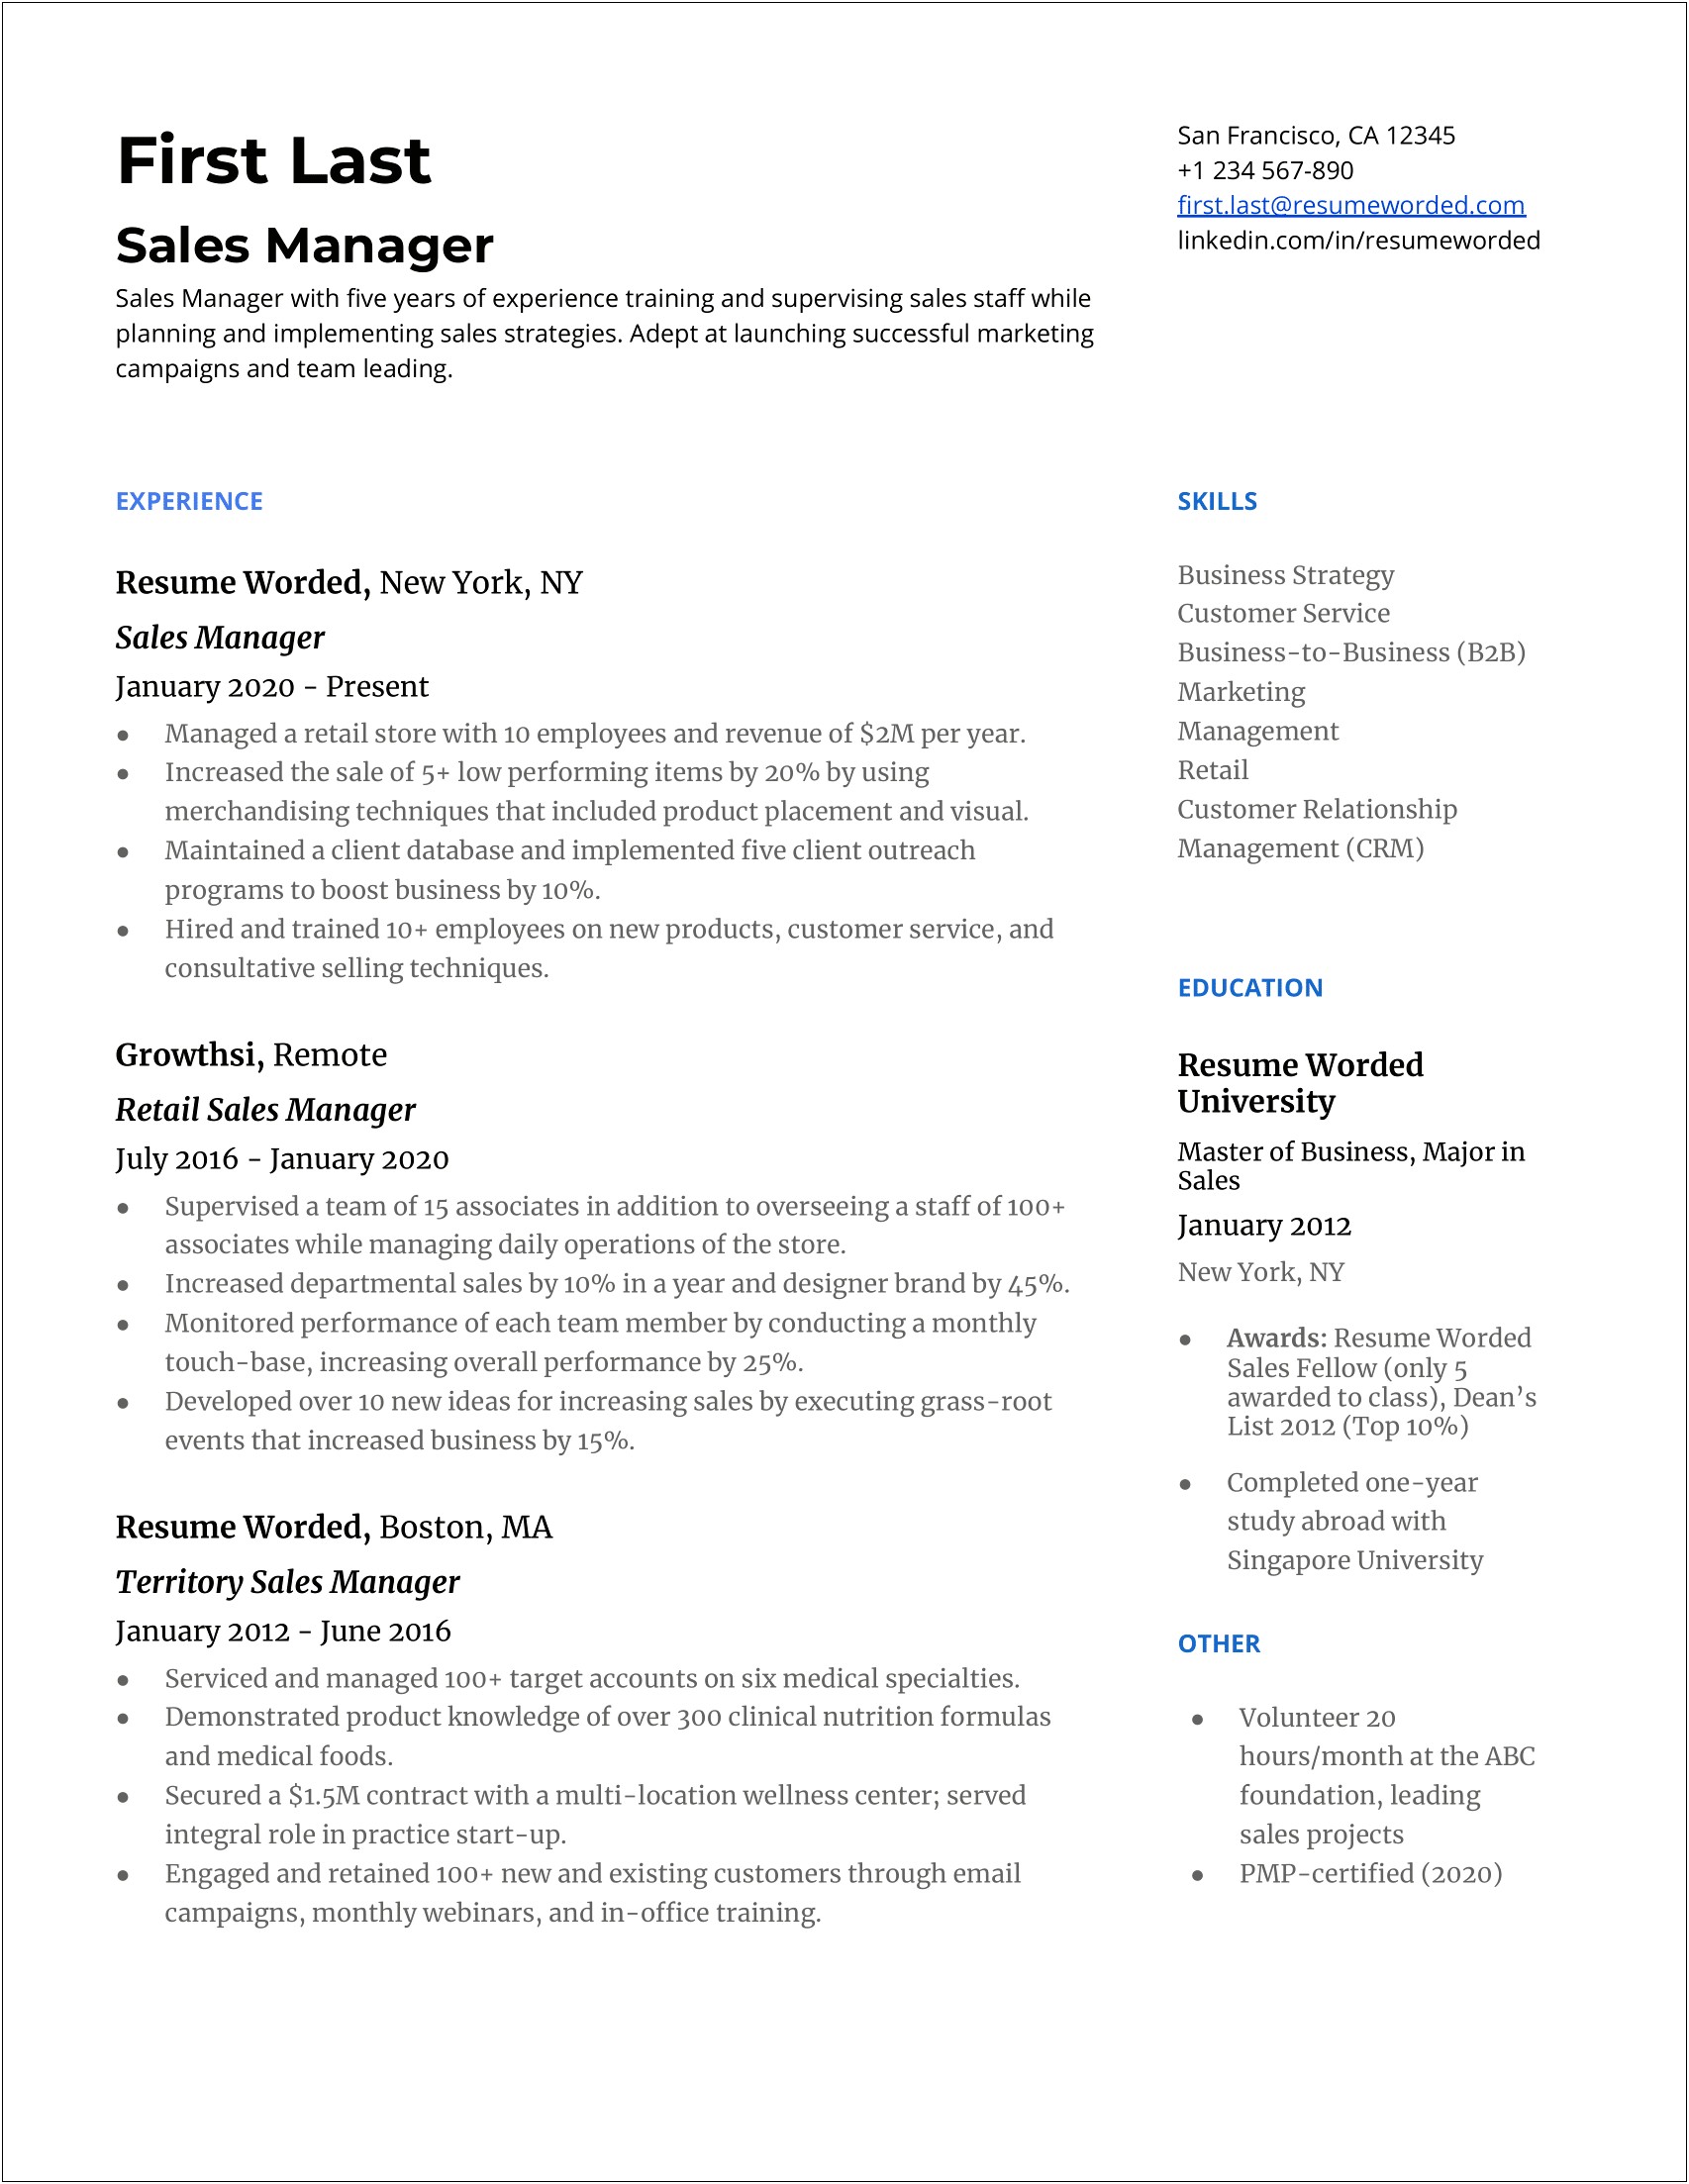 Sample Skills And Abilities For Management Resume